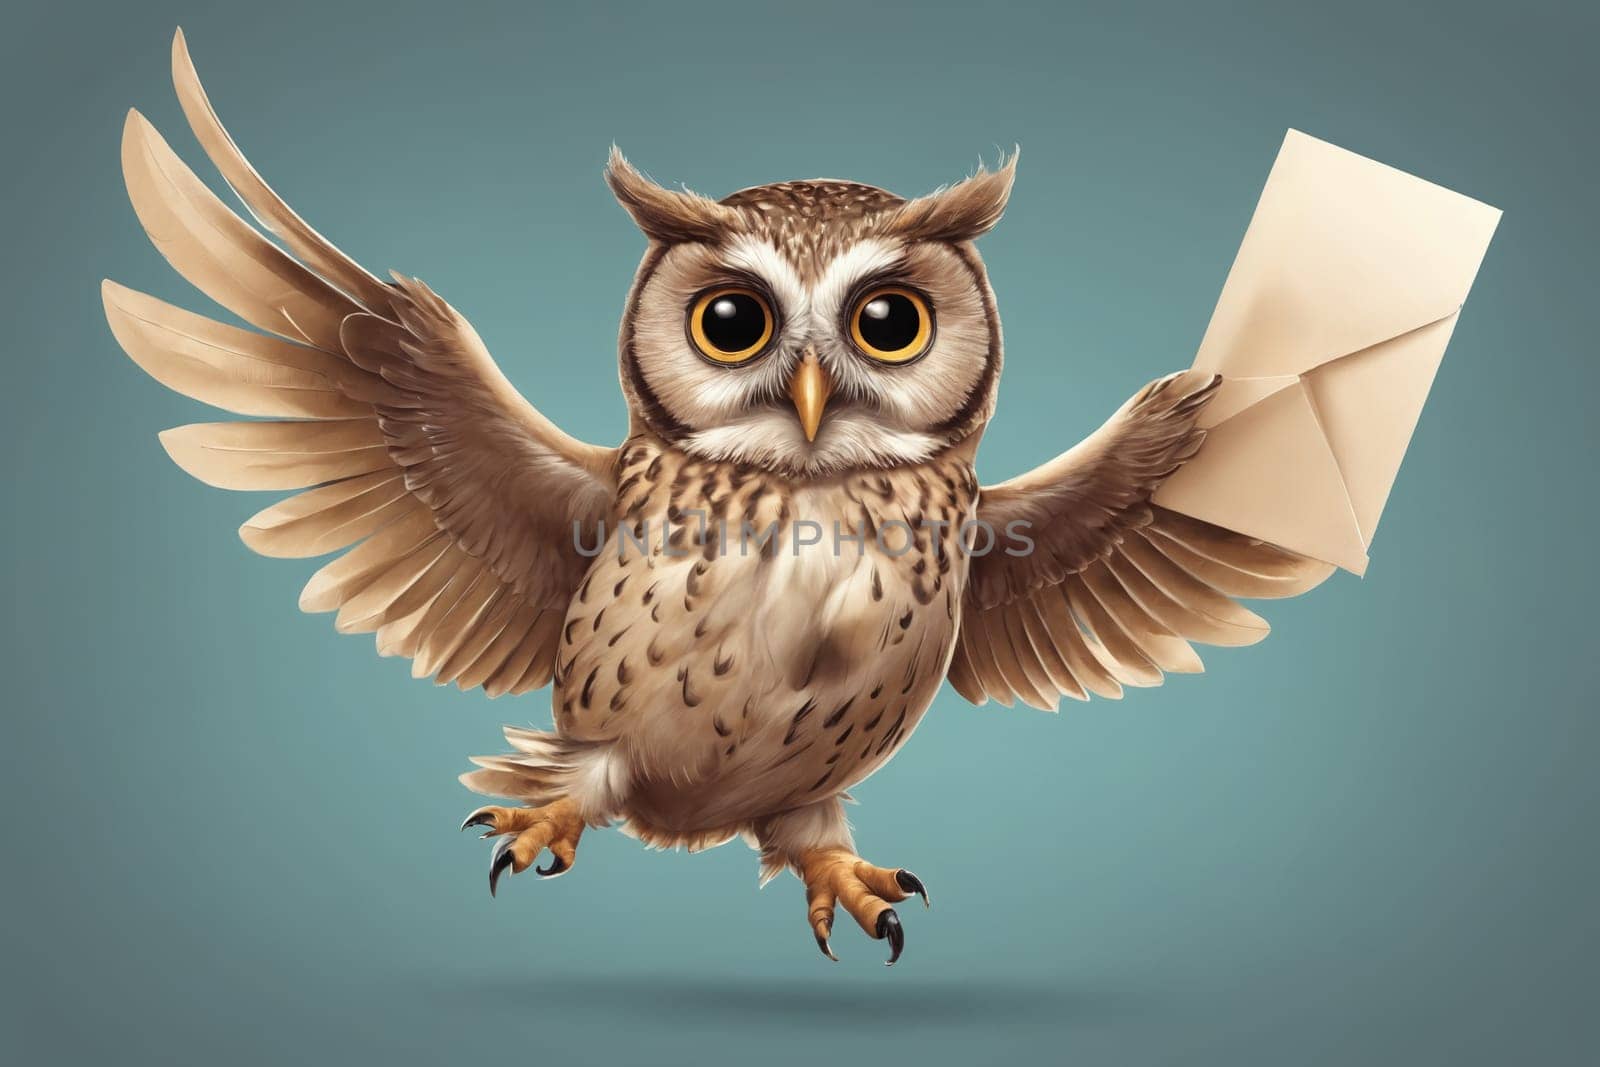 Owlspeed Deliveries: Flying Owl Carrying Sealed Message by Andre1ns